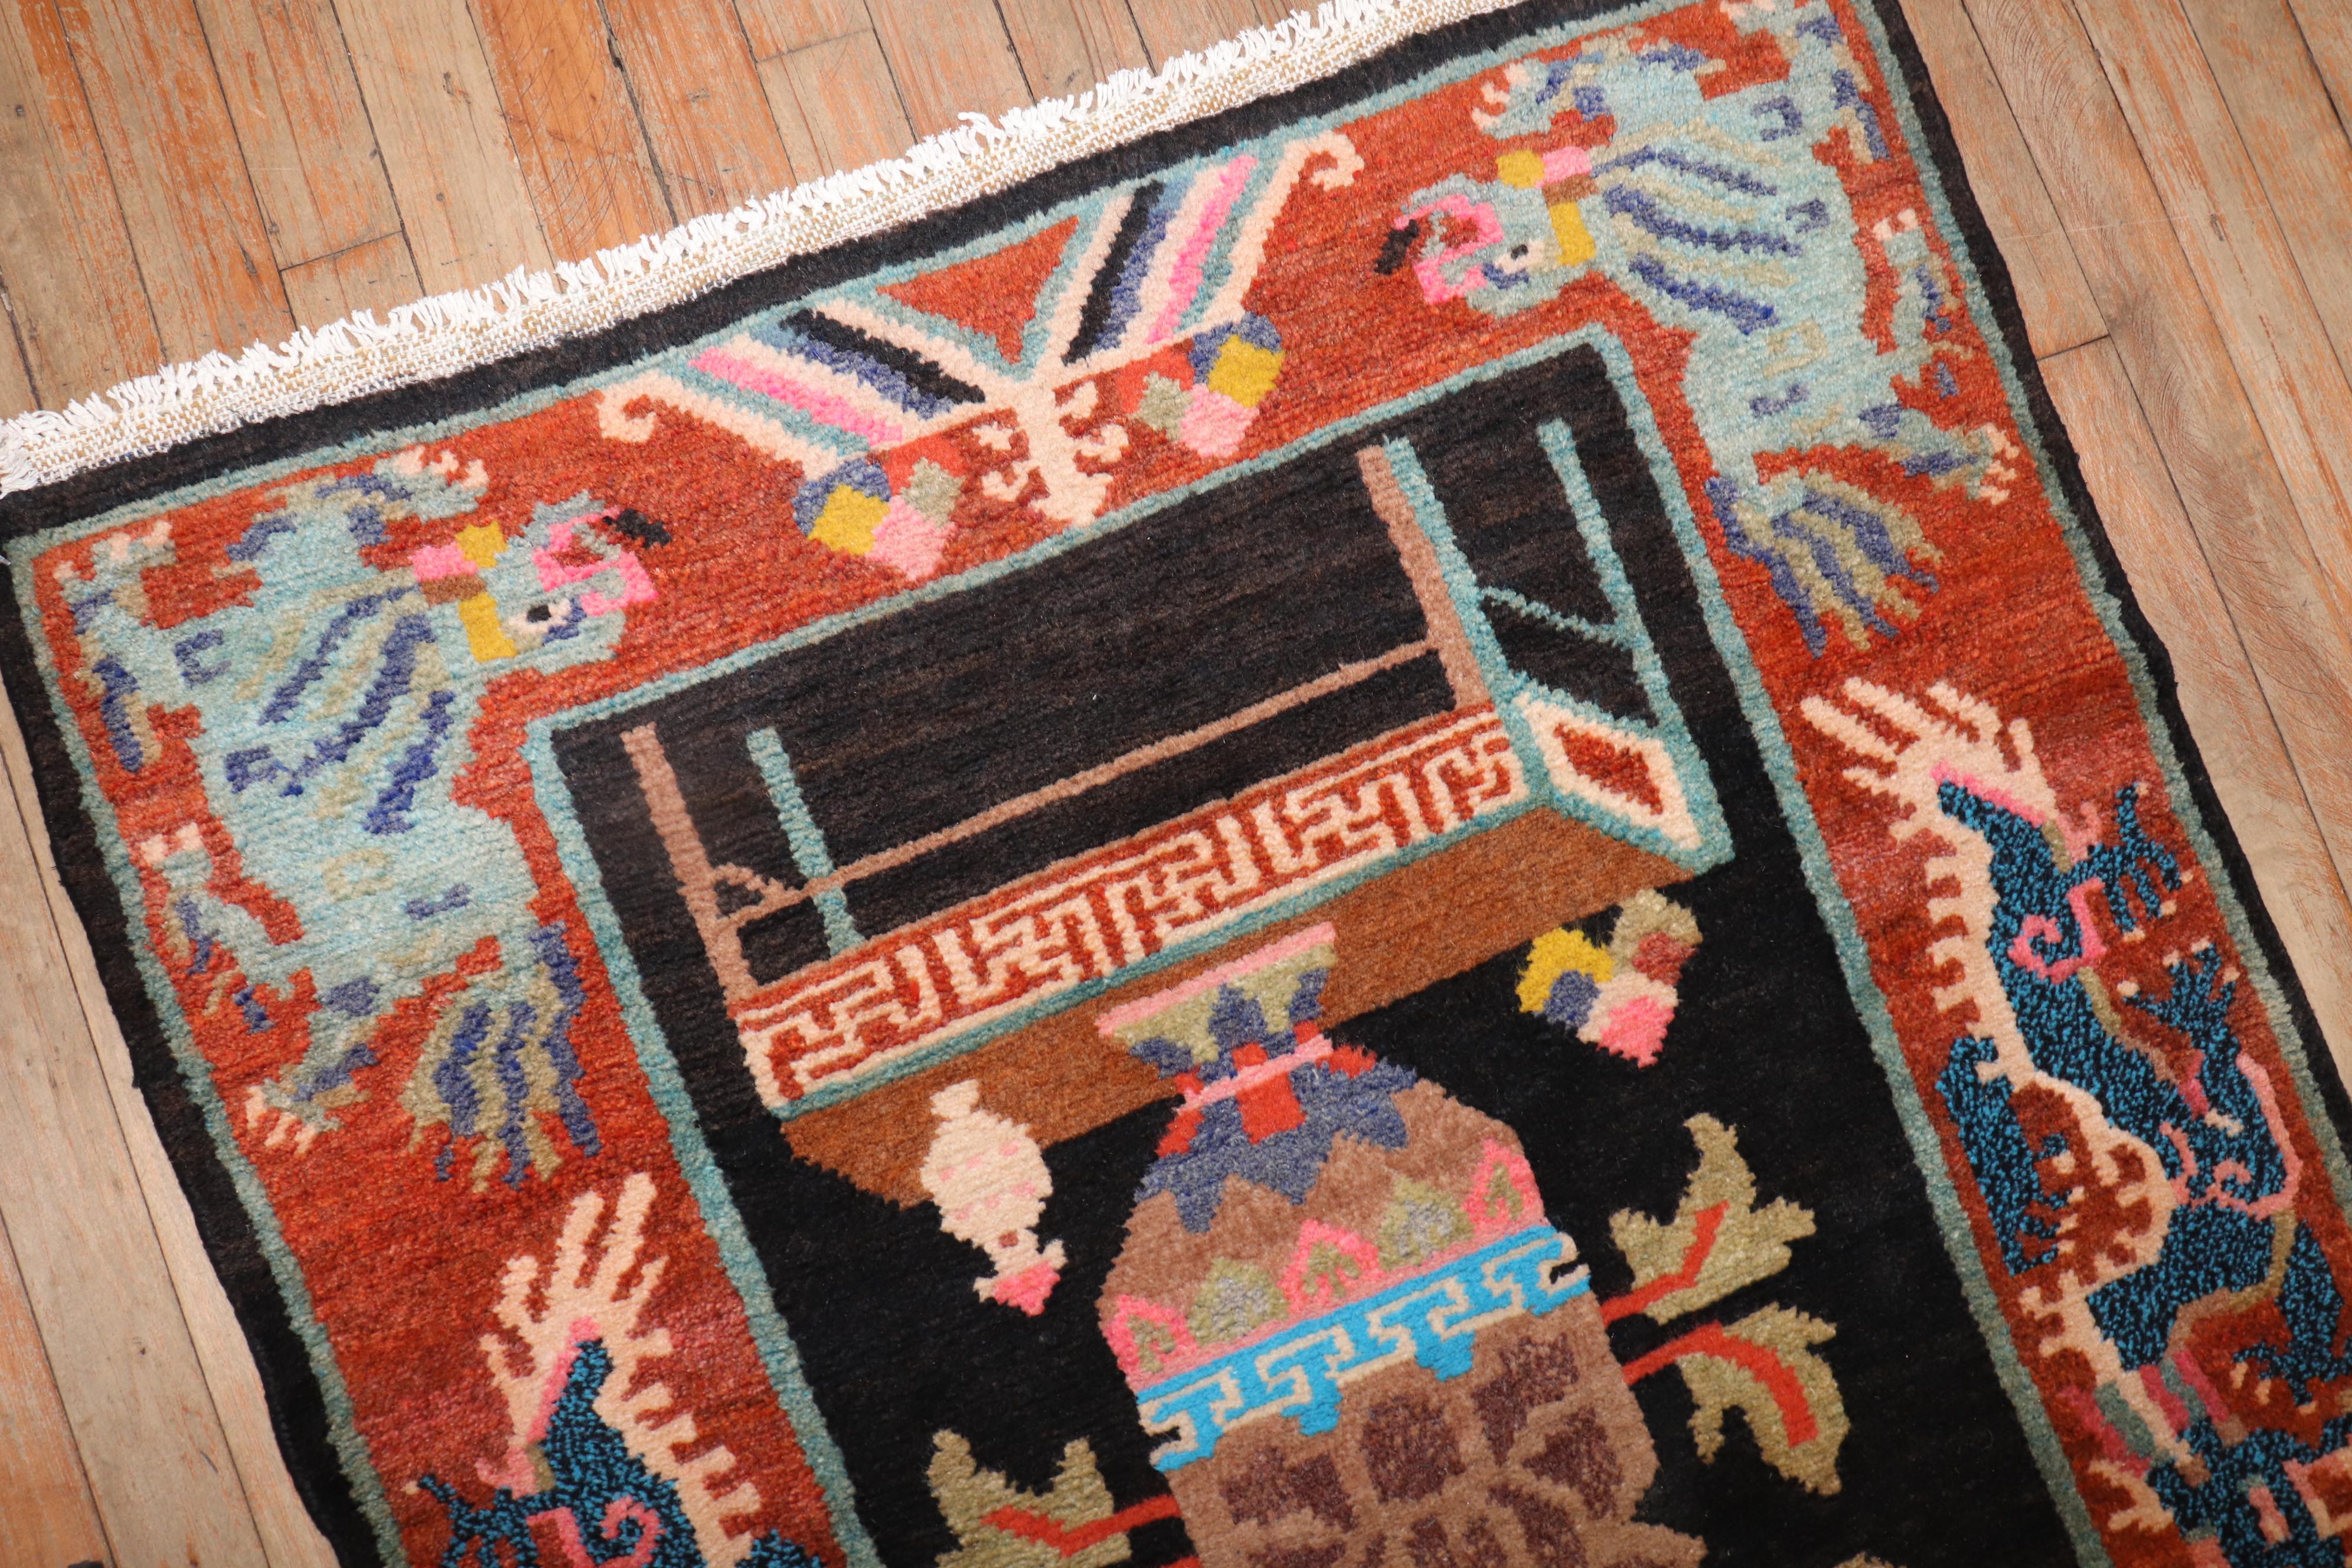 Quirky one-of-a-kind Tibetan rug from the 3rd quarter of the 20th century 

Measures: 3' x 5'8''.